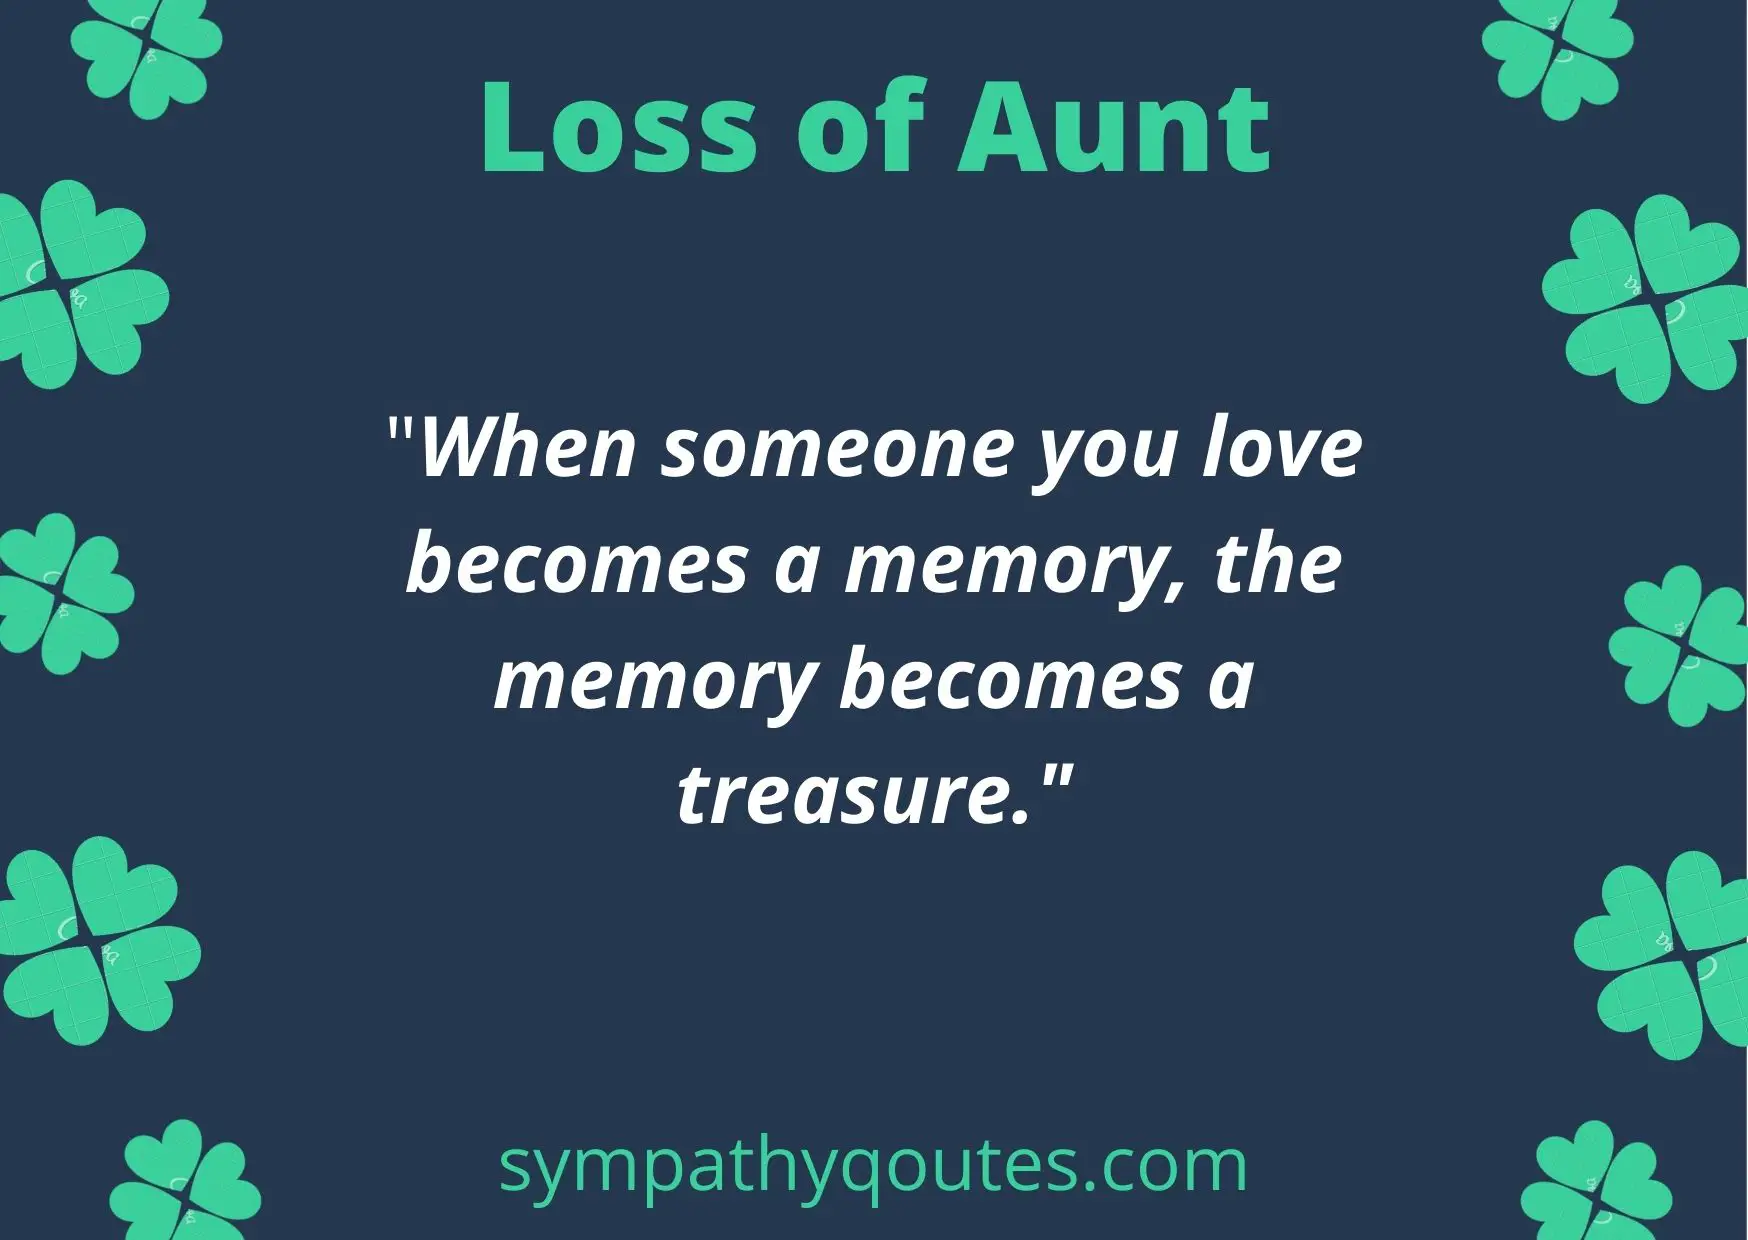 Sympathy Messages for Loss of Aunt